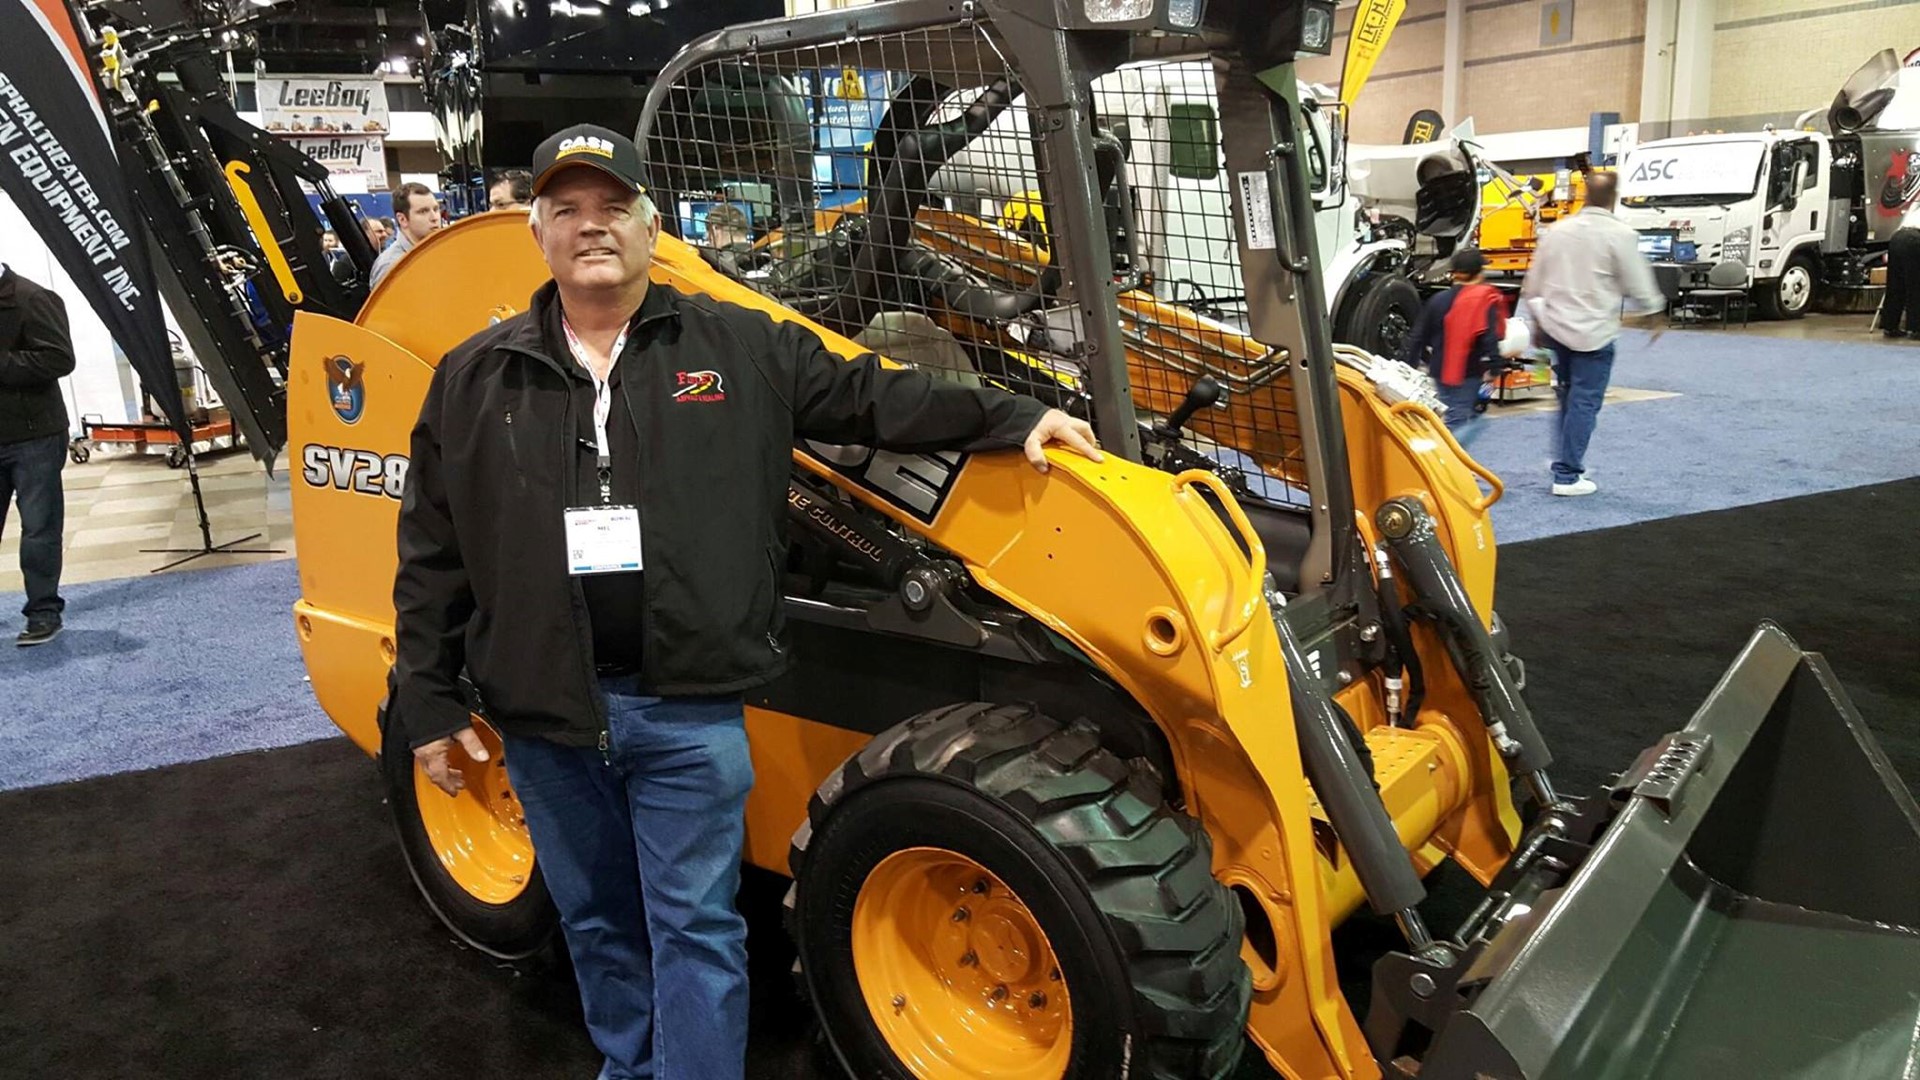 Show attendees had the opportunity to win a CASE SV280 skid steer at the manufacturer’s booth.